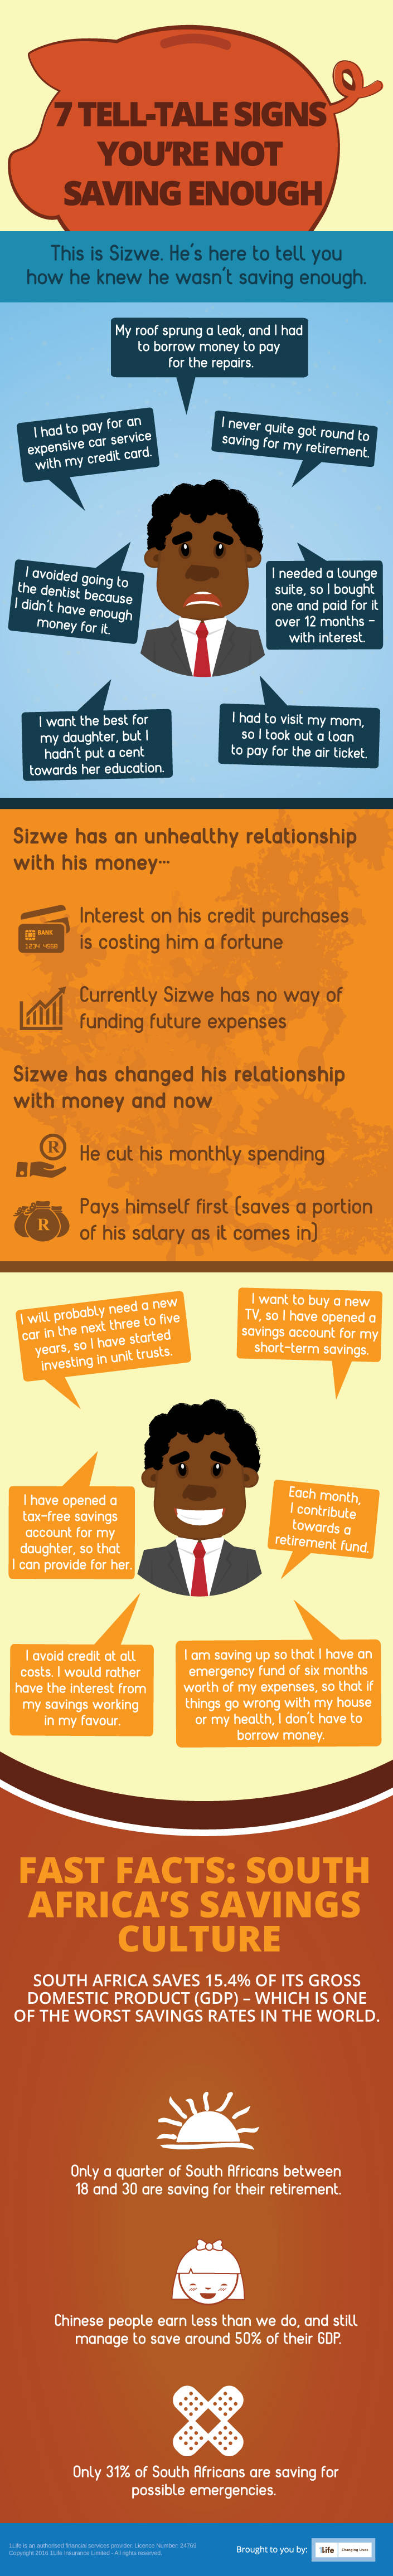 7 tell-tale signs you're not saving enough